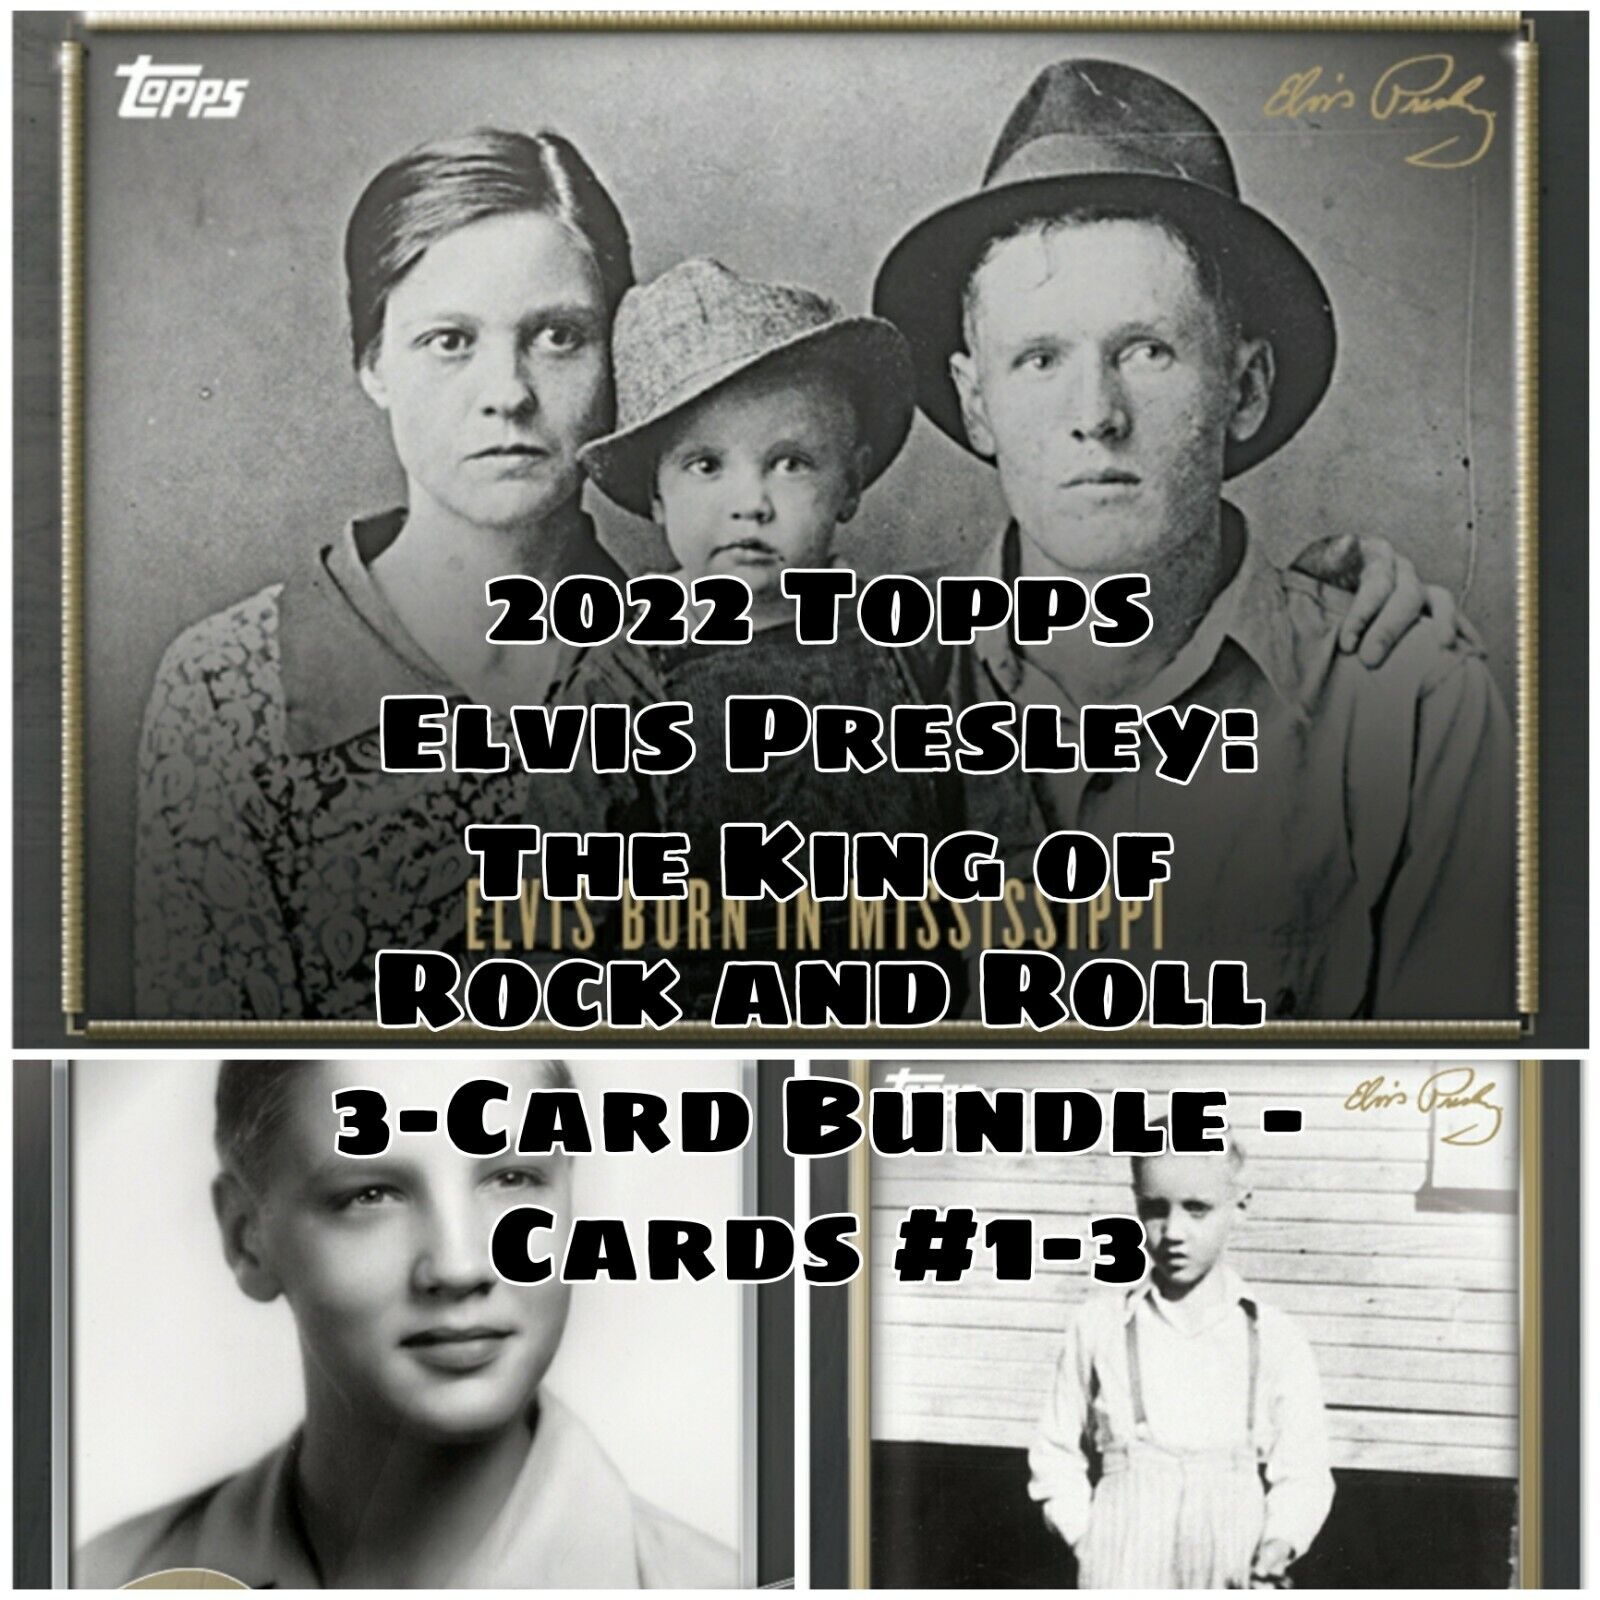 2022 Topps Elvis Presley: The King of Rock and Roll 3-Card Bundle #1-3 Pre Order